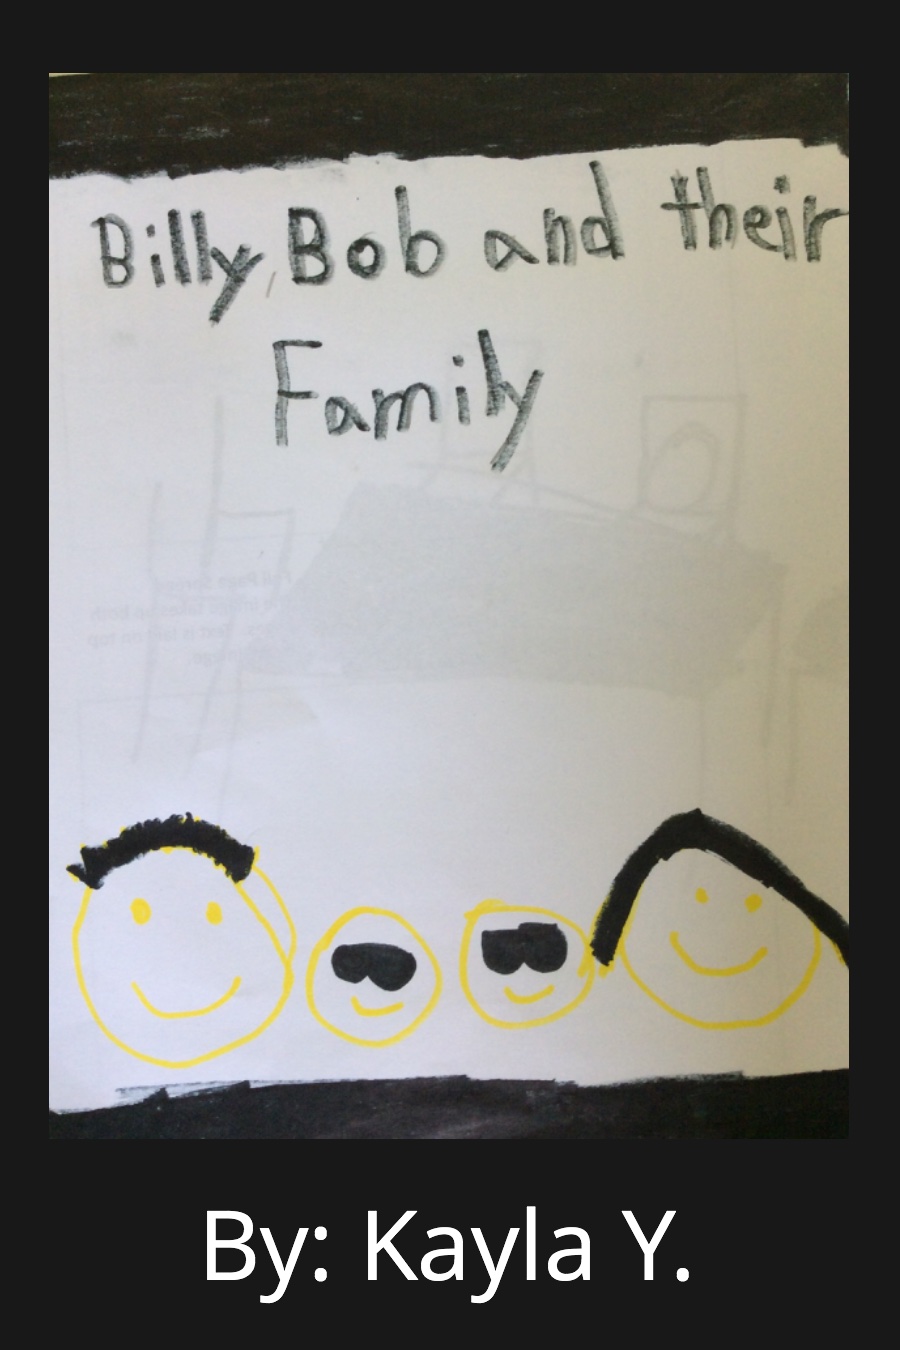 Bob, Billy, And Family by Kayla Y